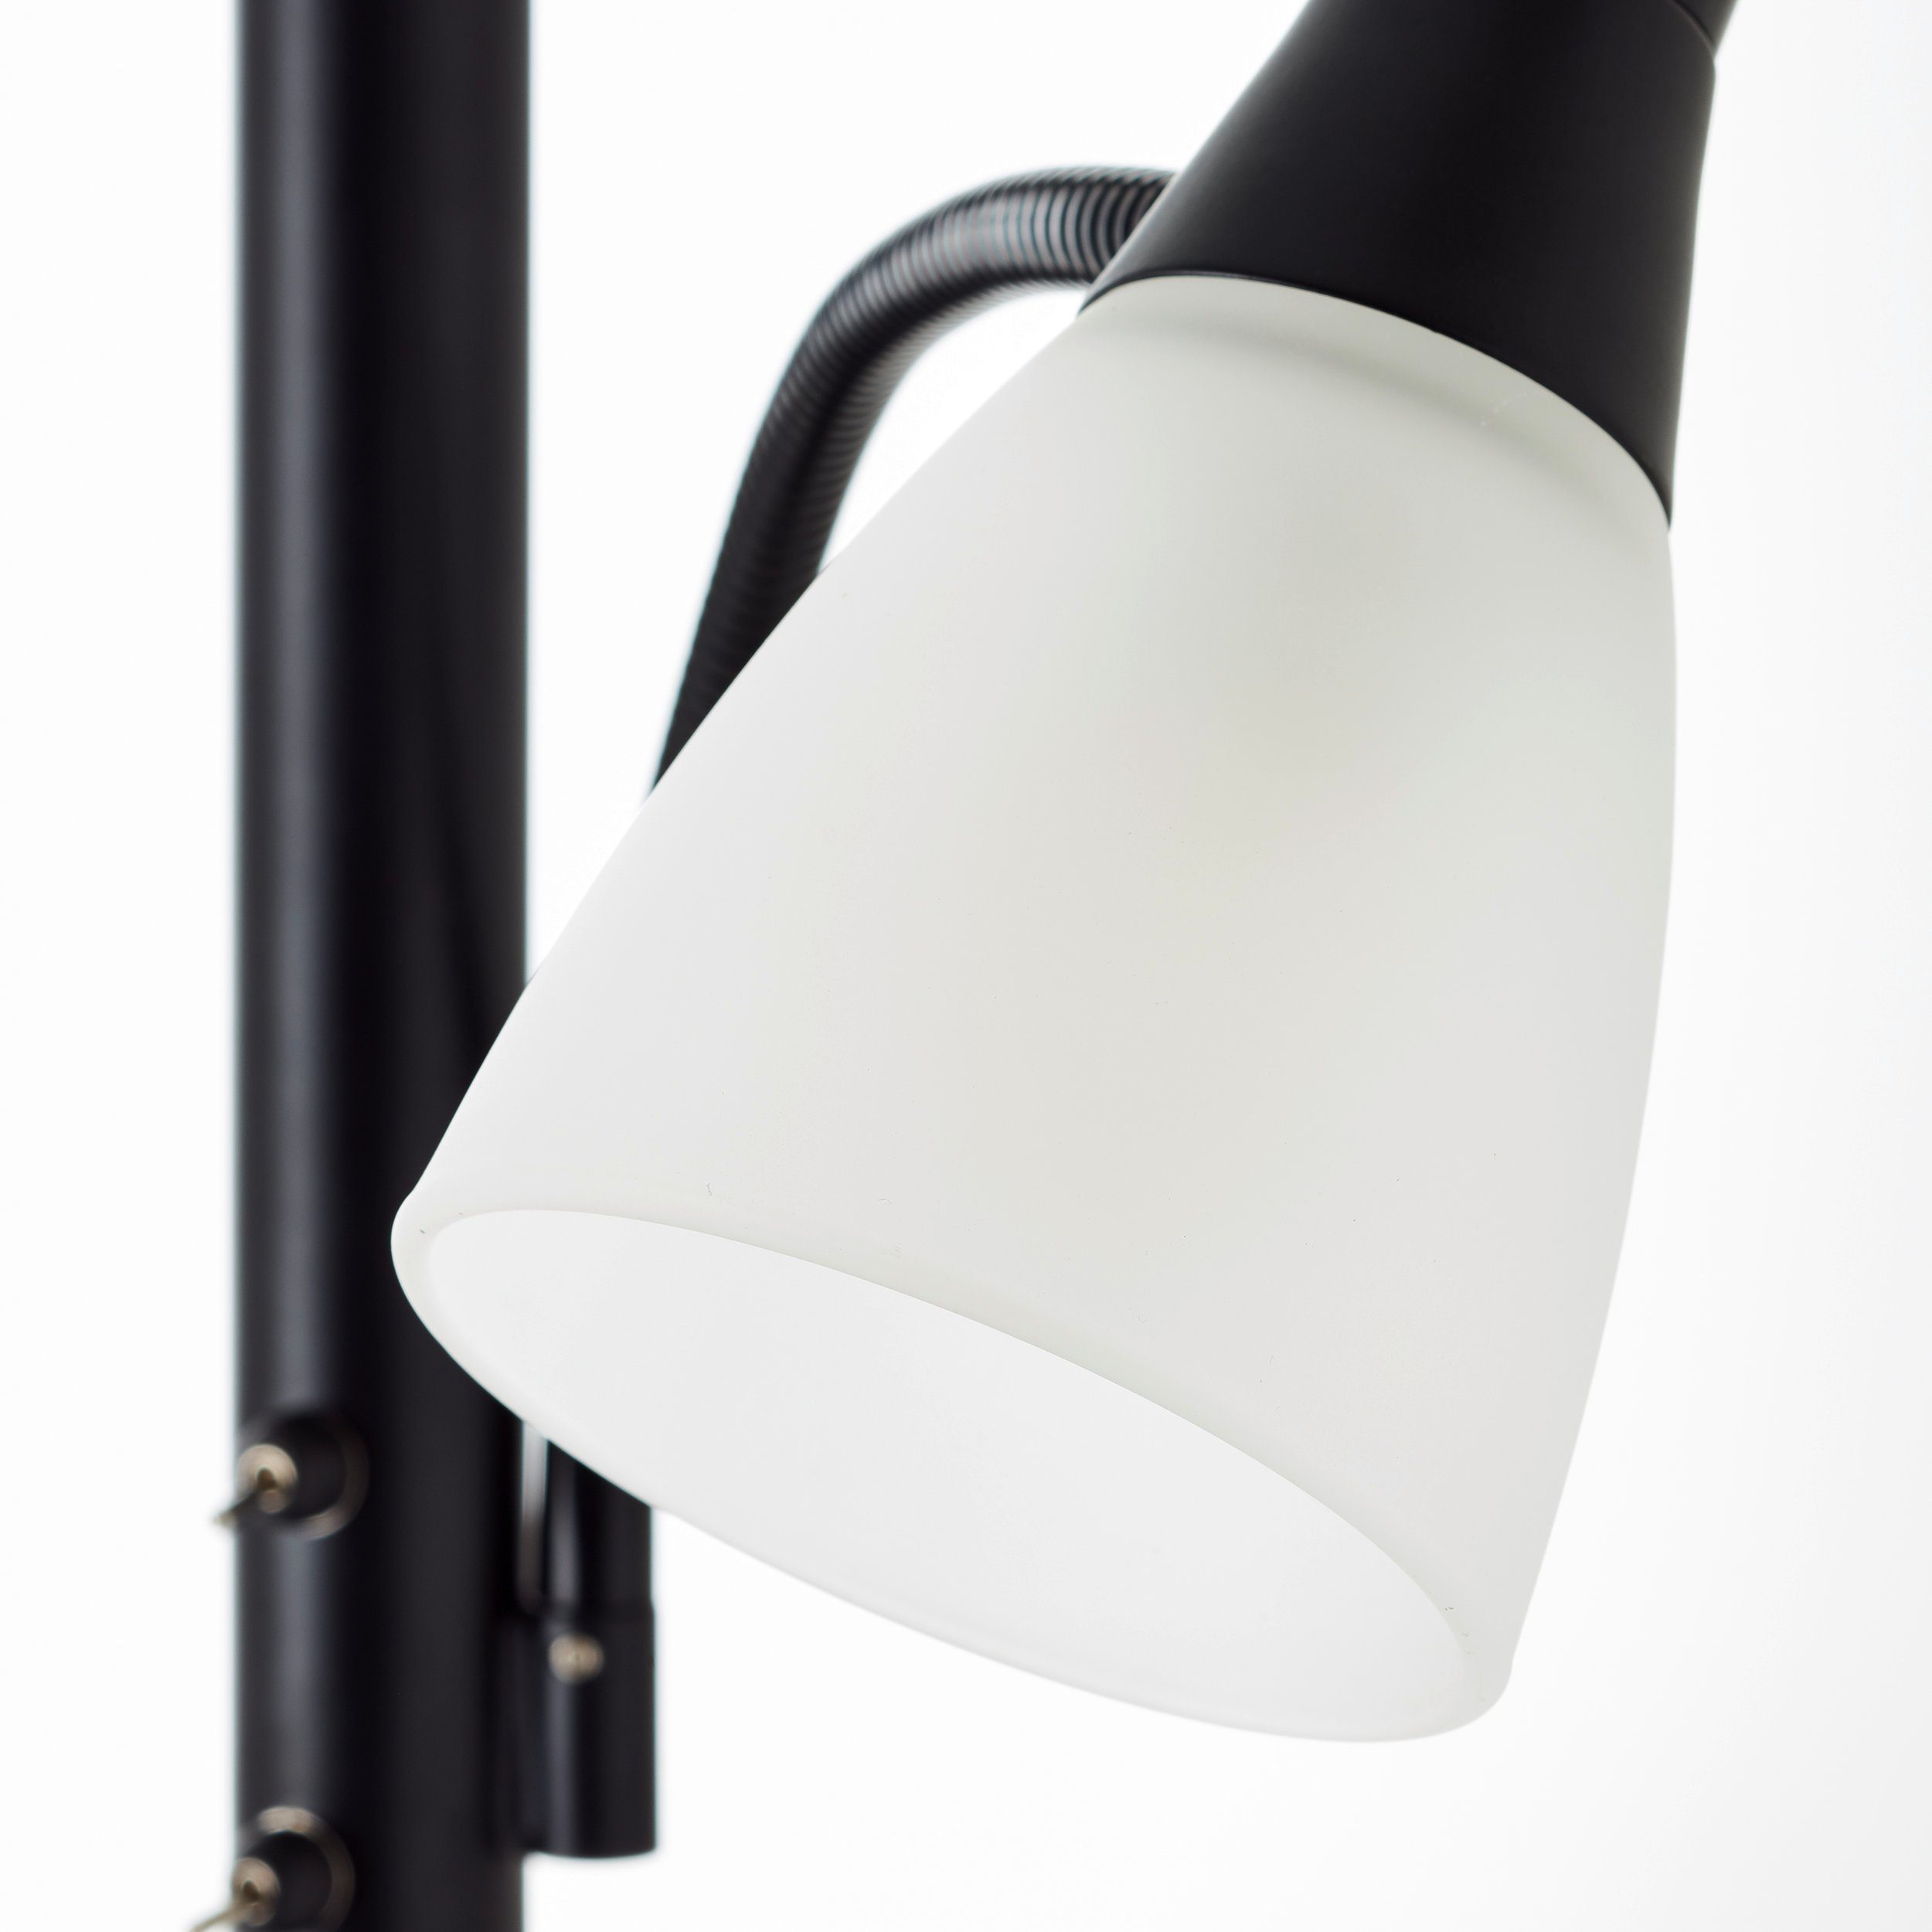 A60, schwarz, Metall/Glas, 1x Lucy, E27, Brilliant 5 Stehlampe LED Lesearm W Deckenfluter Lucy